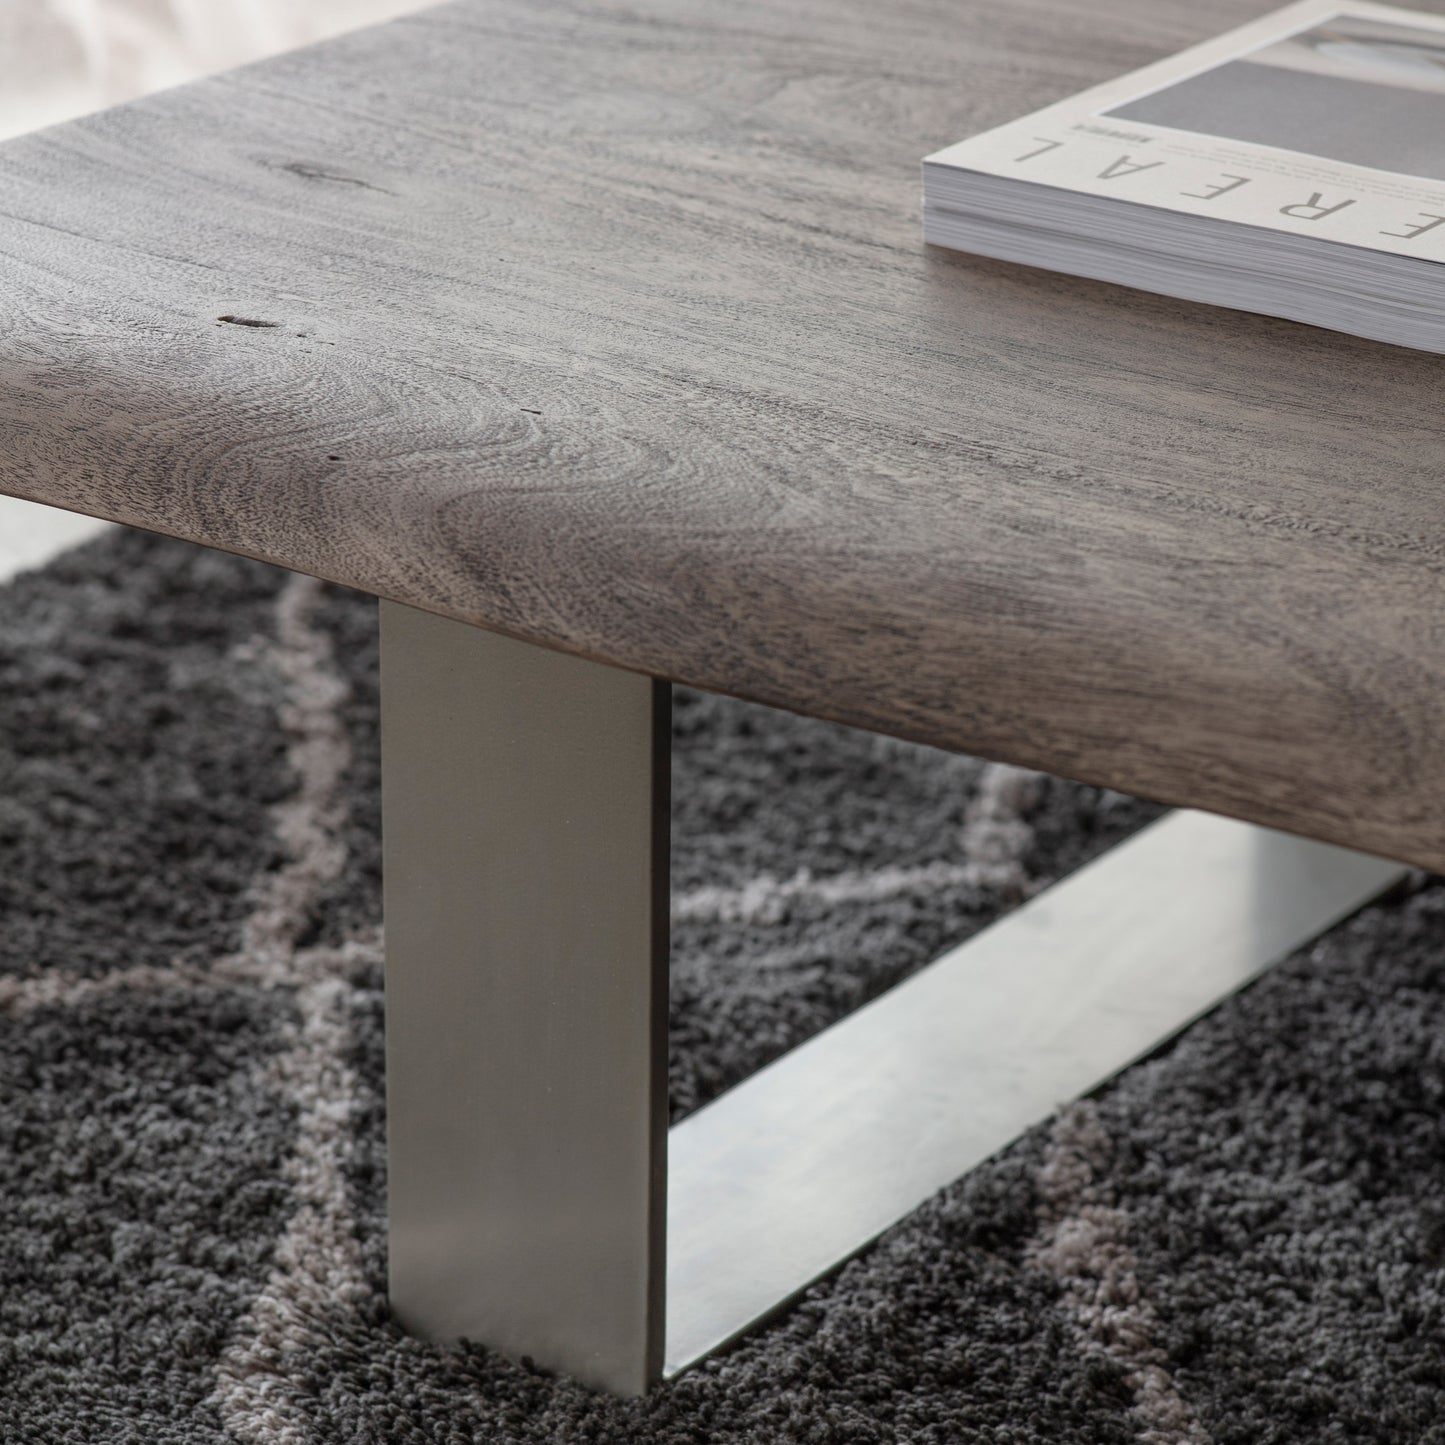 A Southpool Coffee Table with a metal base and a book on it, perfect for interior decor and home furniture.